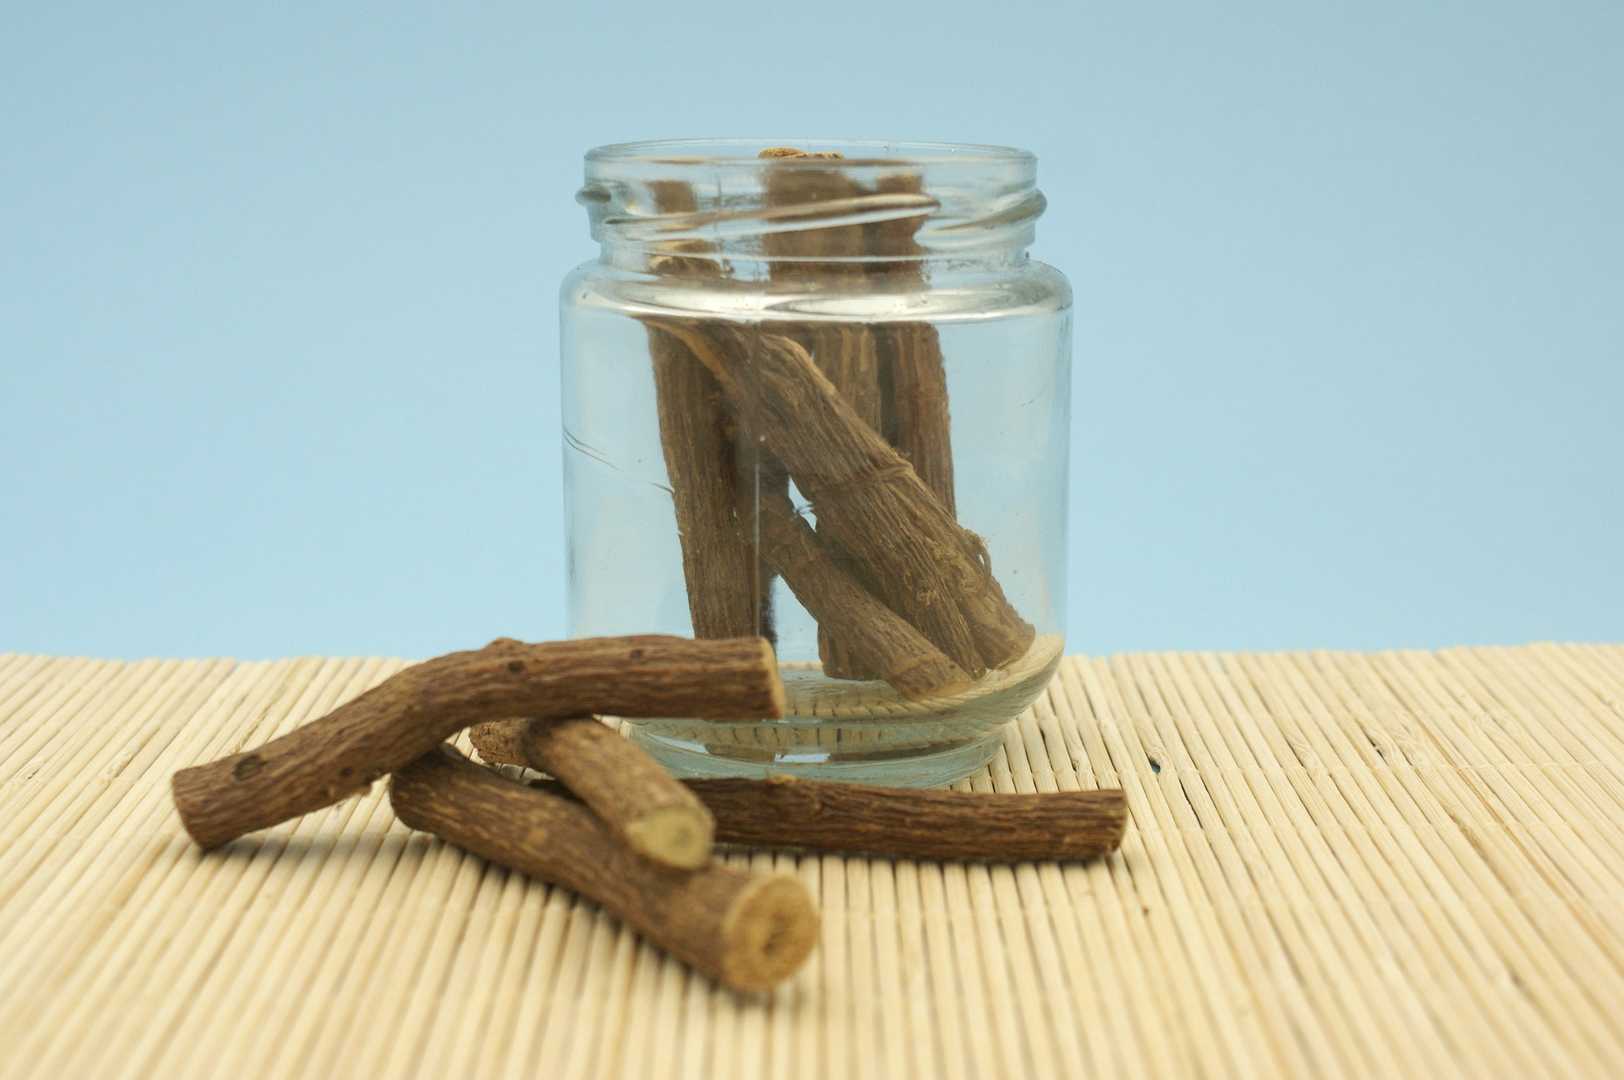 Clear glass jar holding stalks of Licorice Root